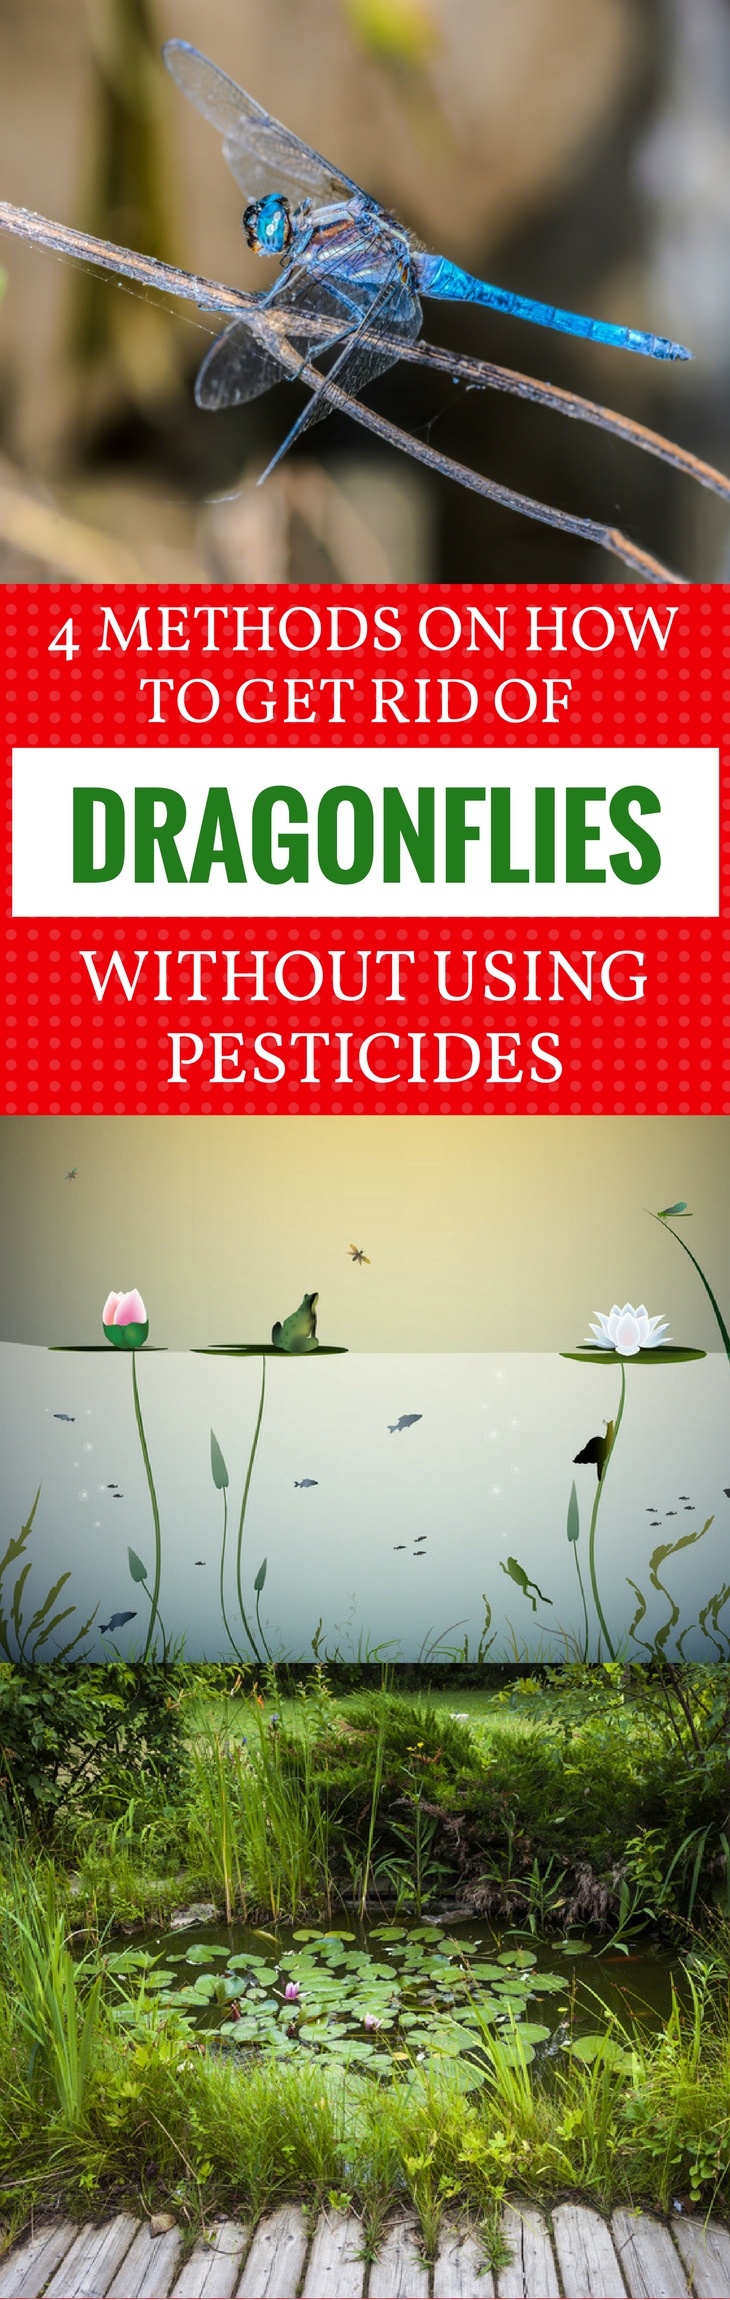 4 Methods On How To Get Rid Of Dragonflies Without Using ...